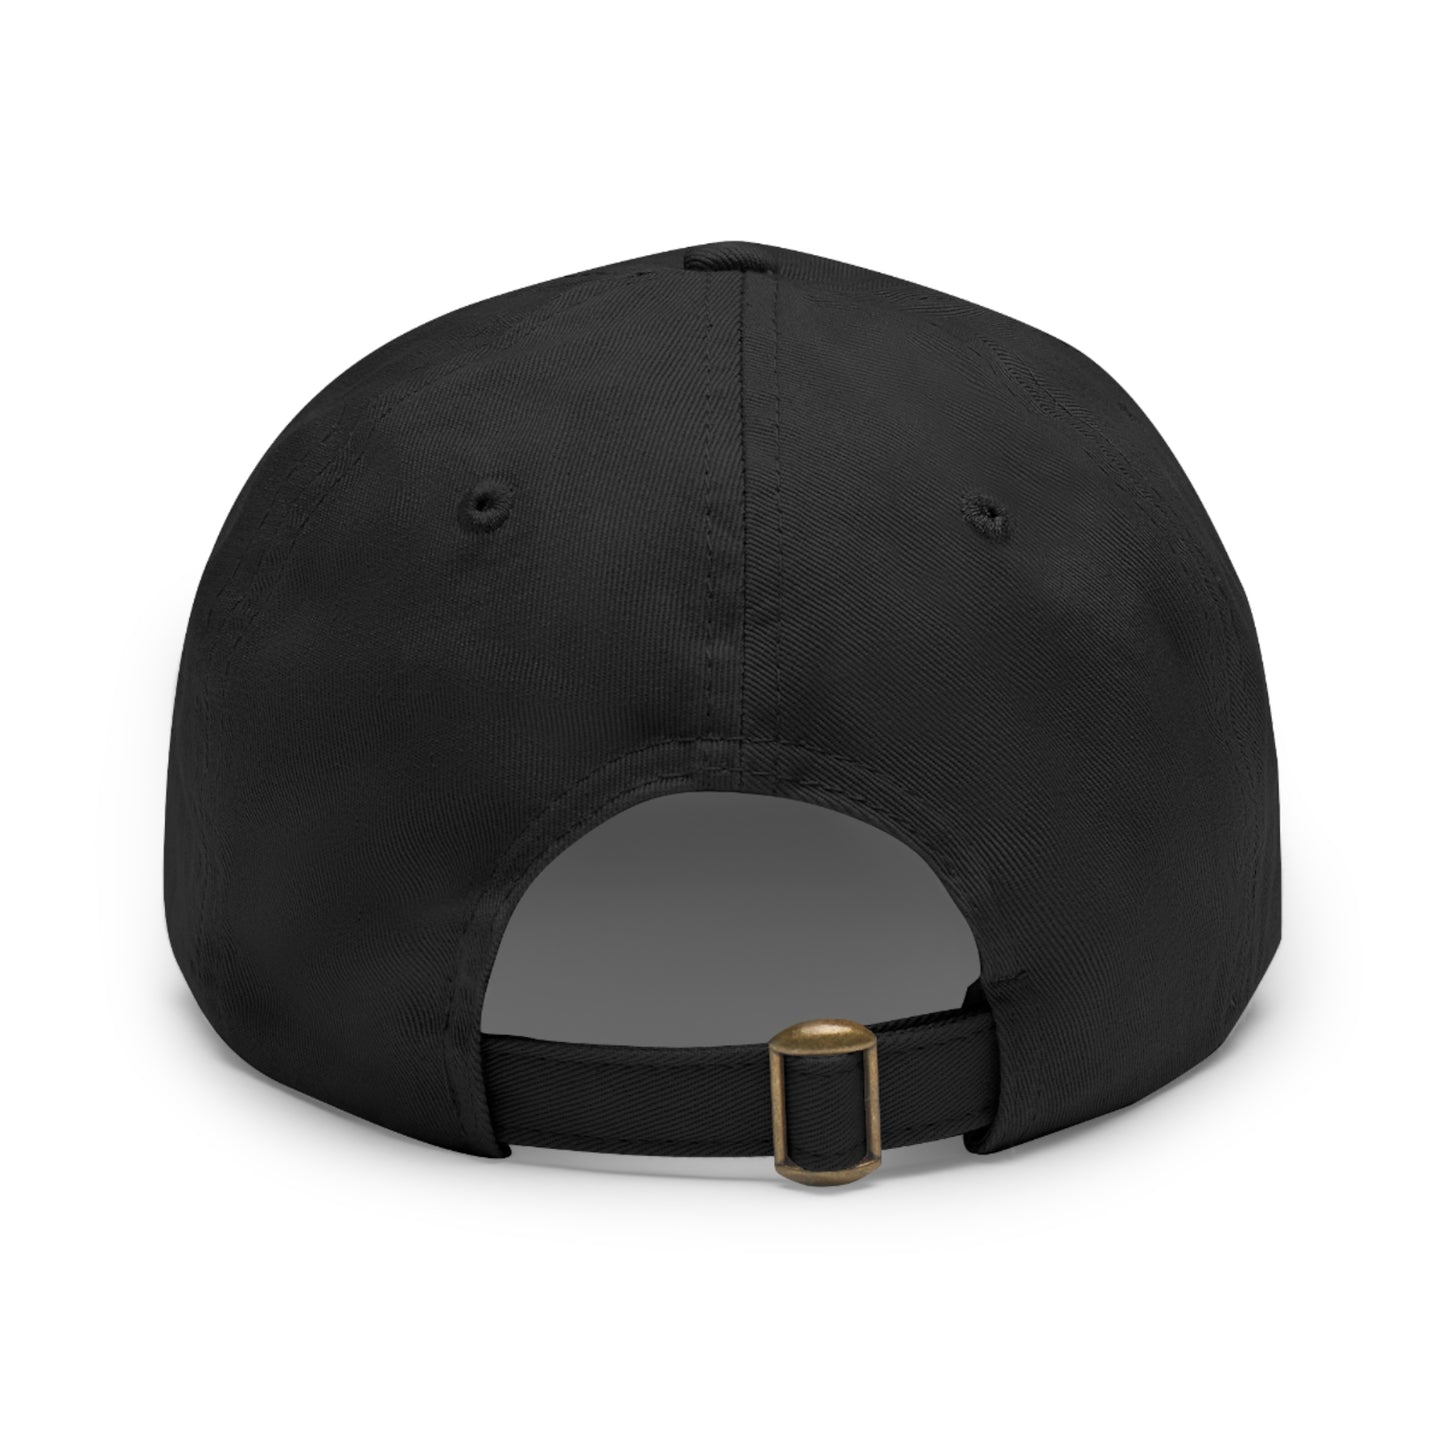 Montessori  Cap with Leather Patch